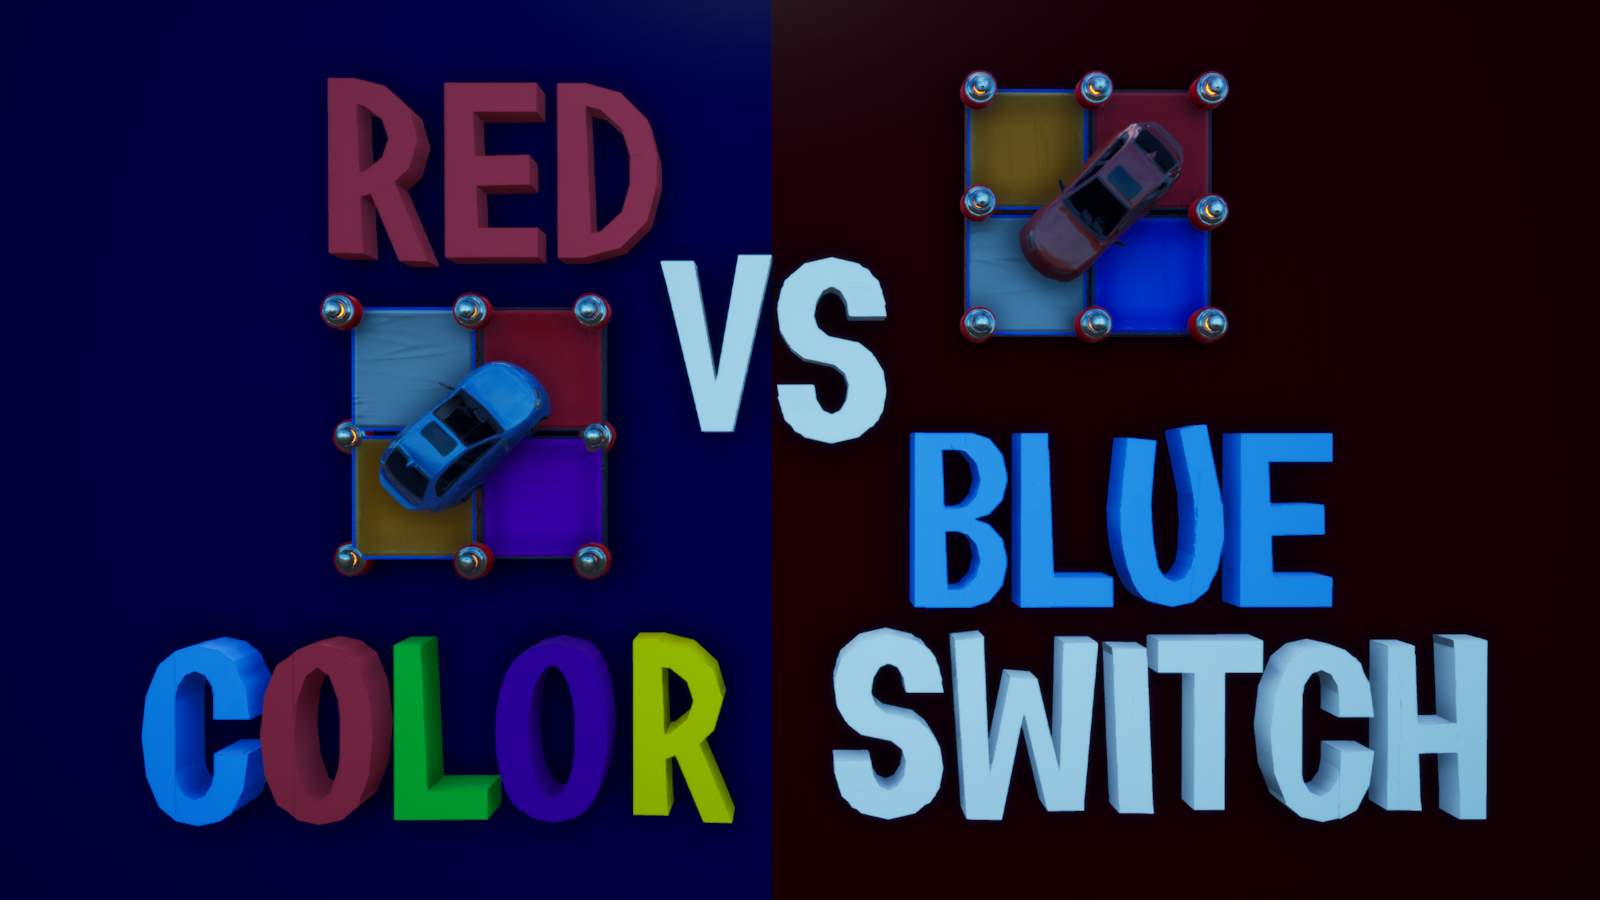 RED VS BLUE COLOR SWITCH